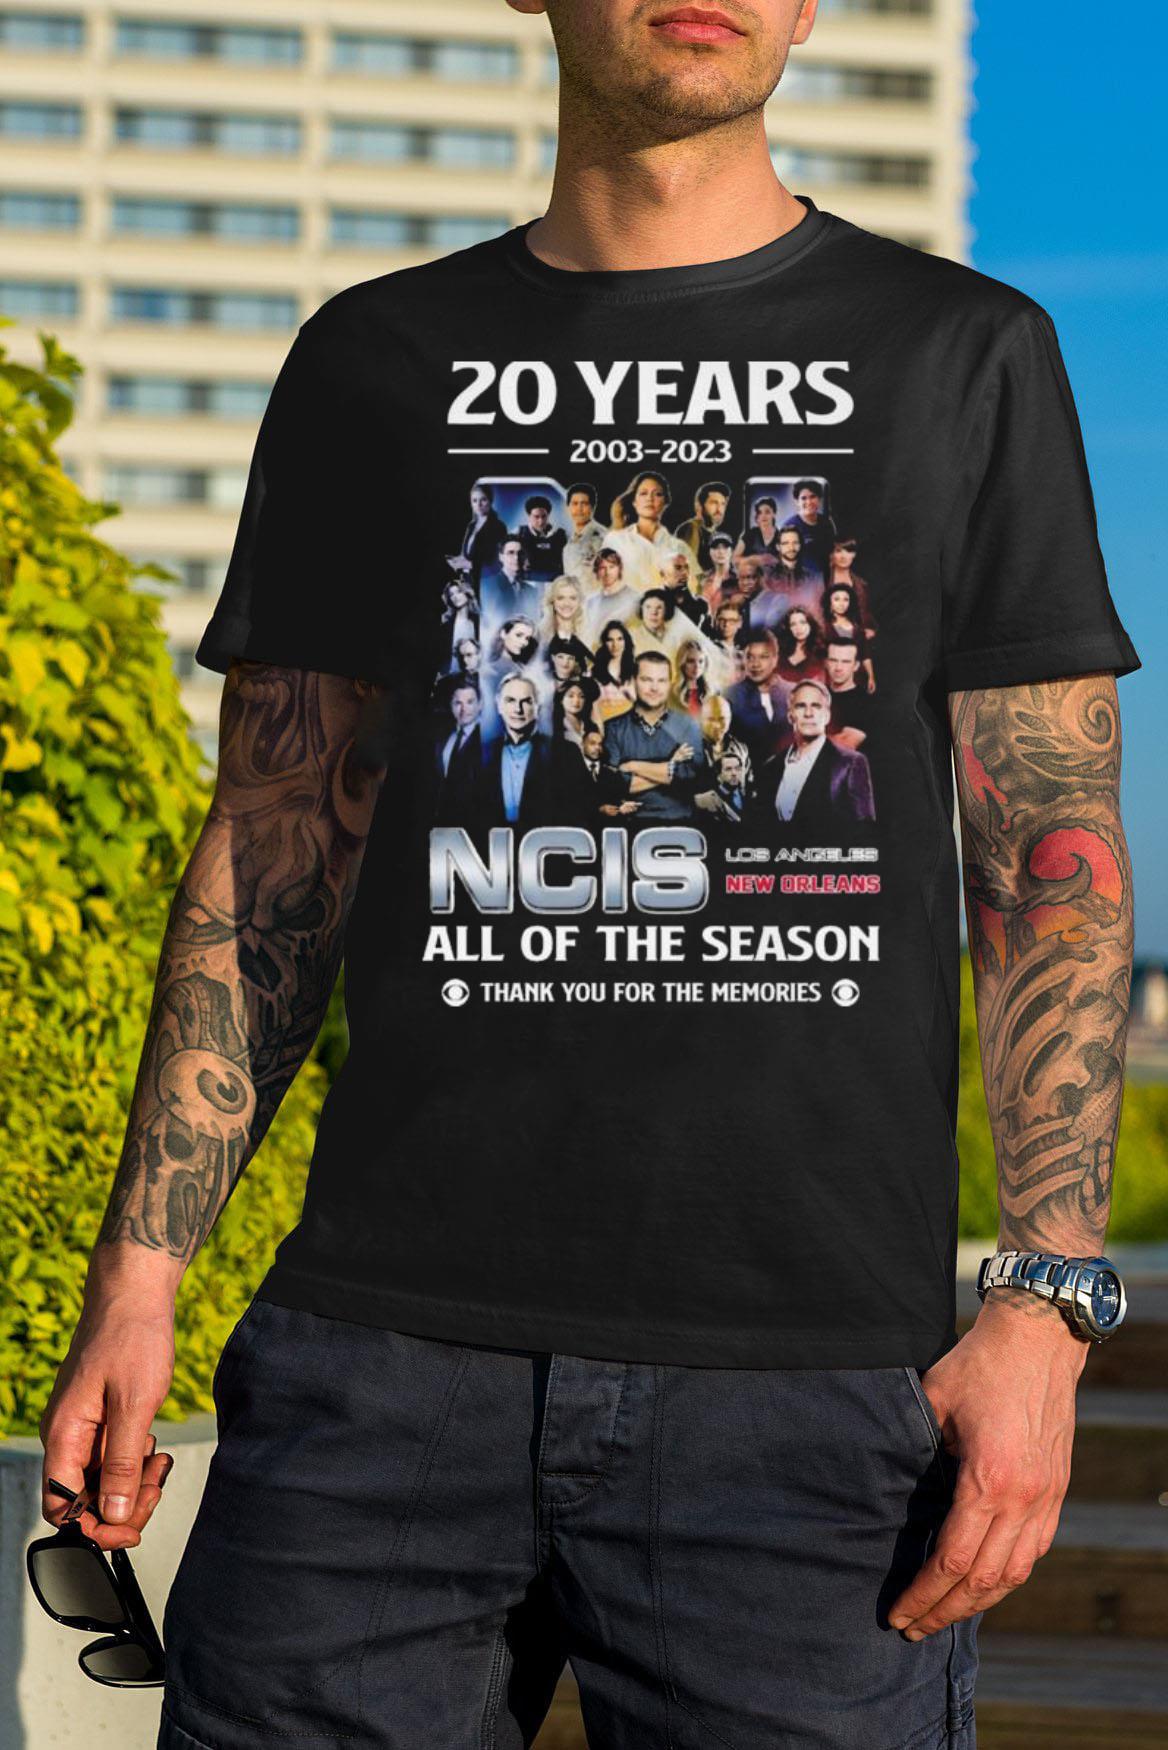 20 years 2003 2023 NCIS Los Angeles New Orleans All of the Season shirt